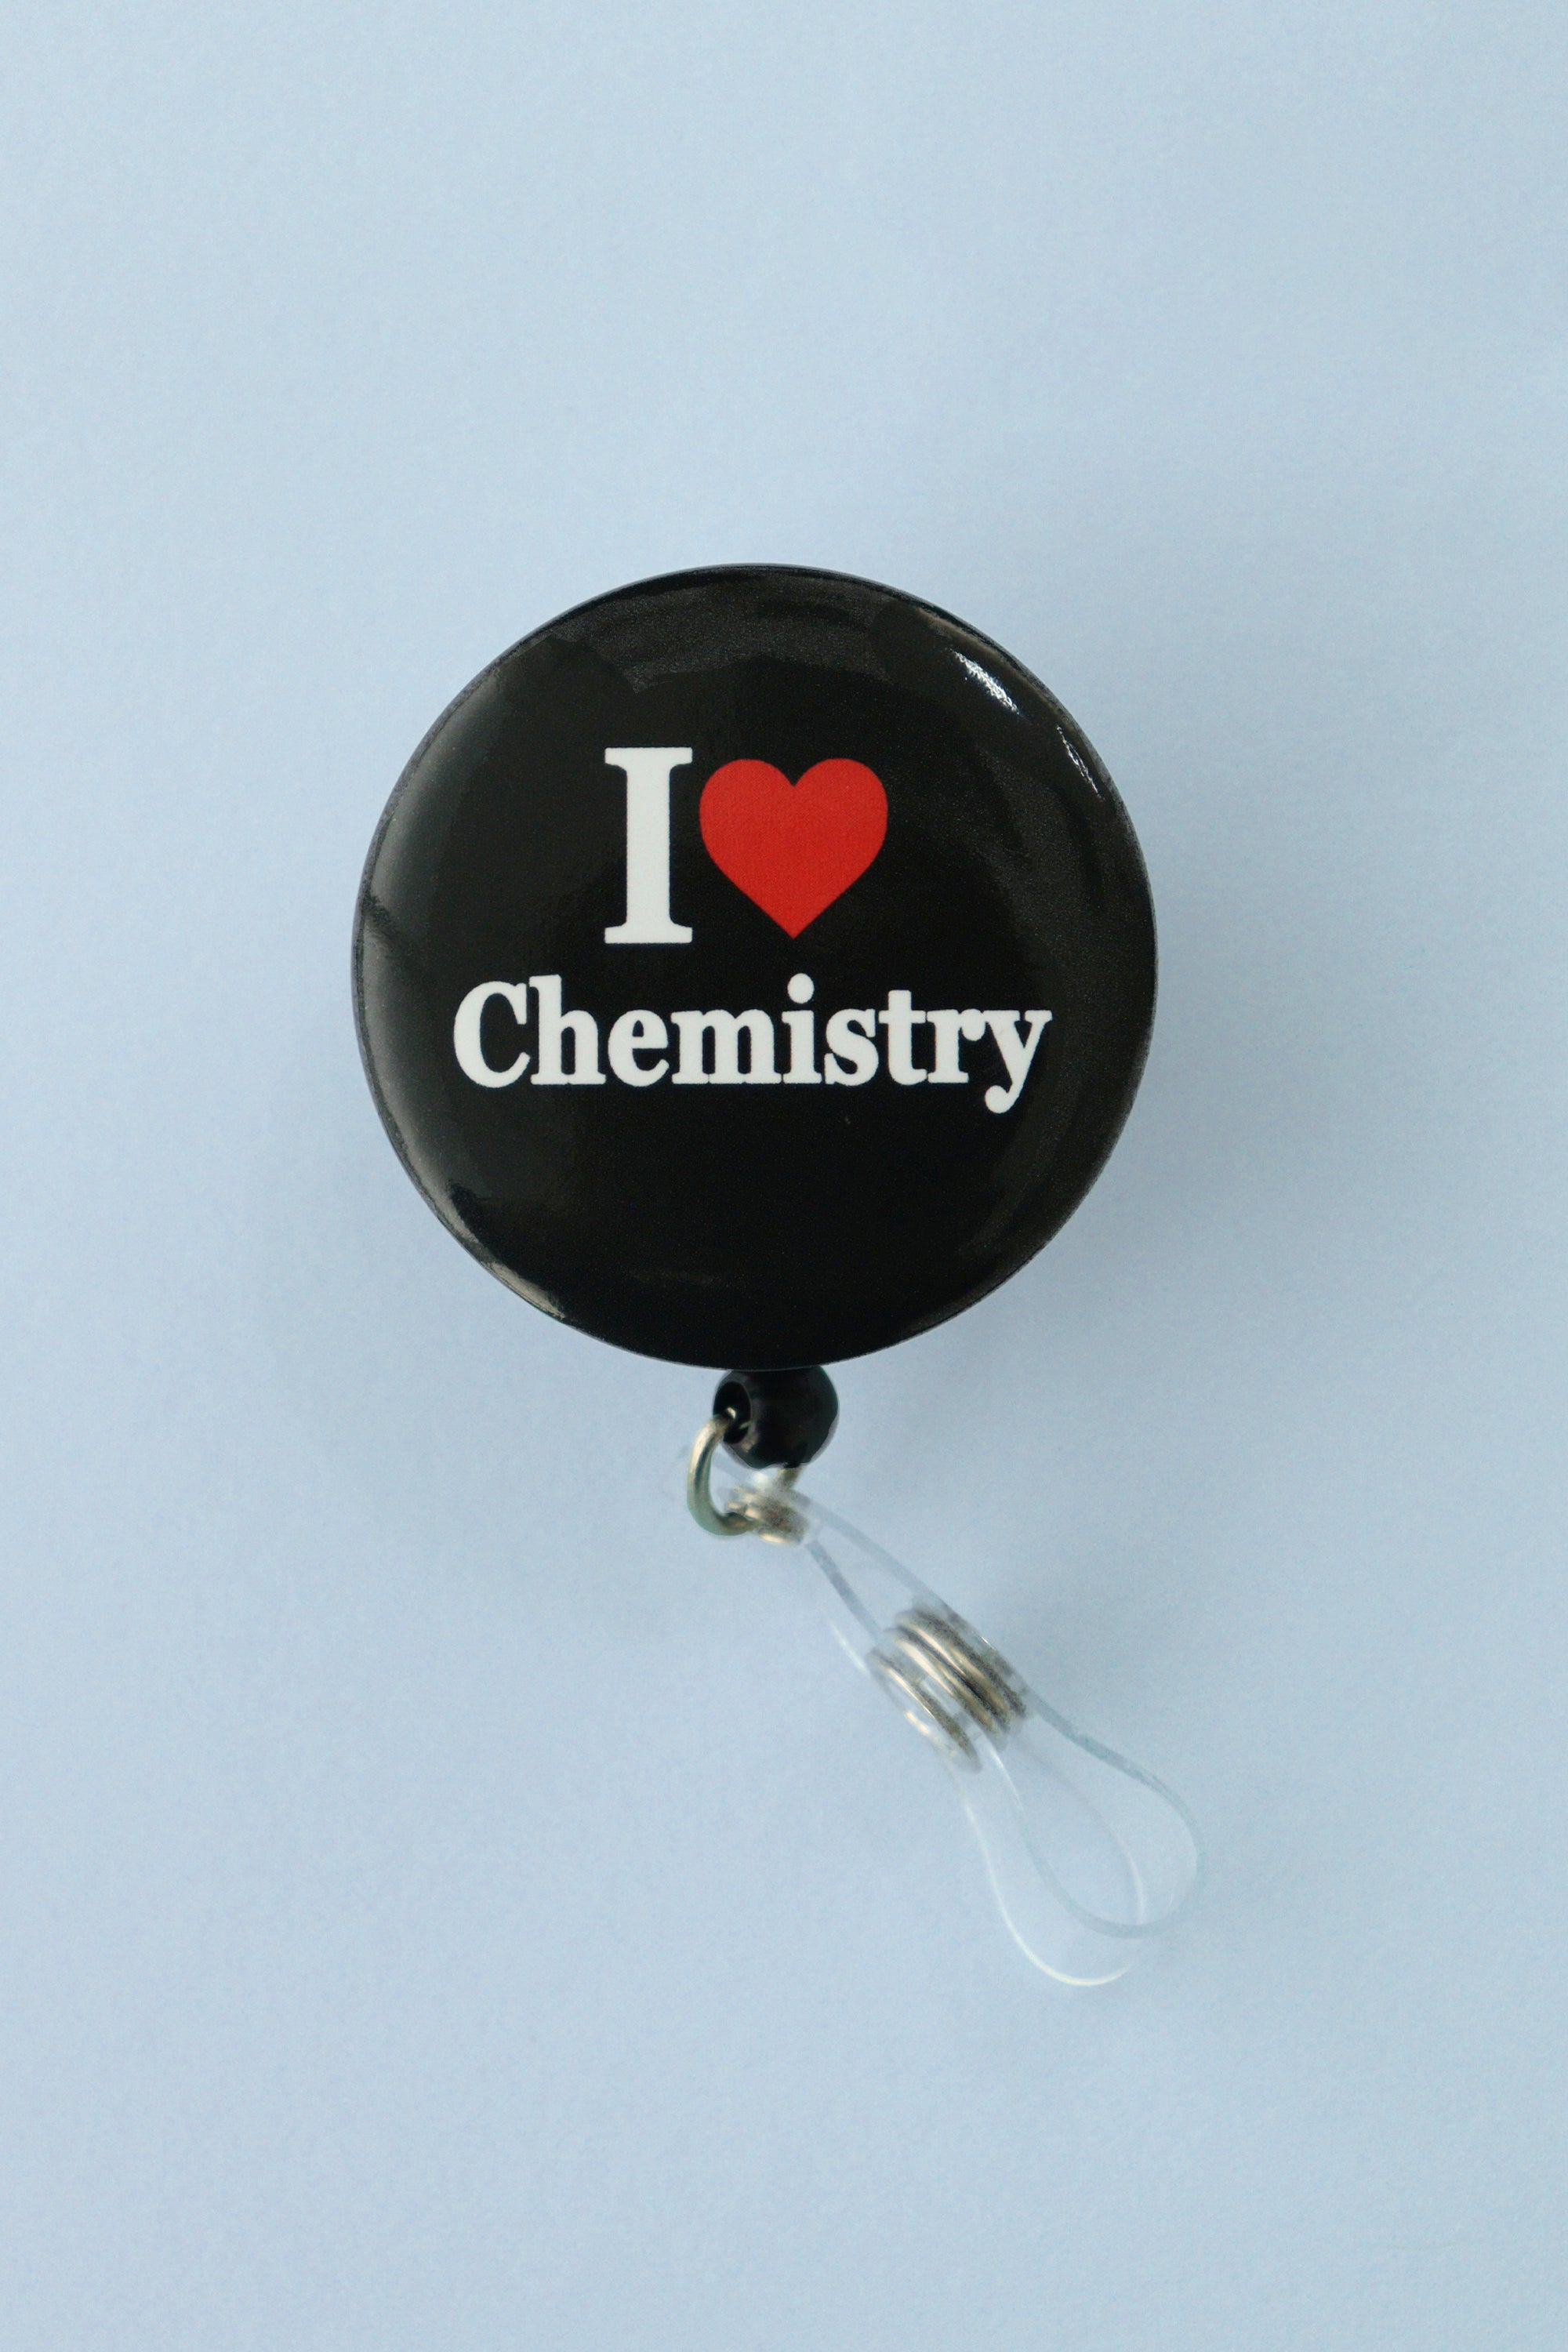 products-1chemistry-jpg